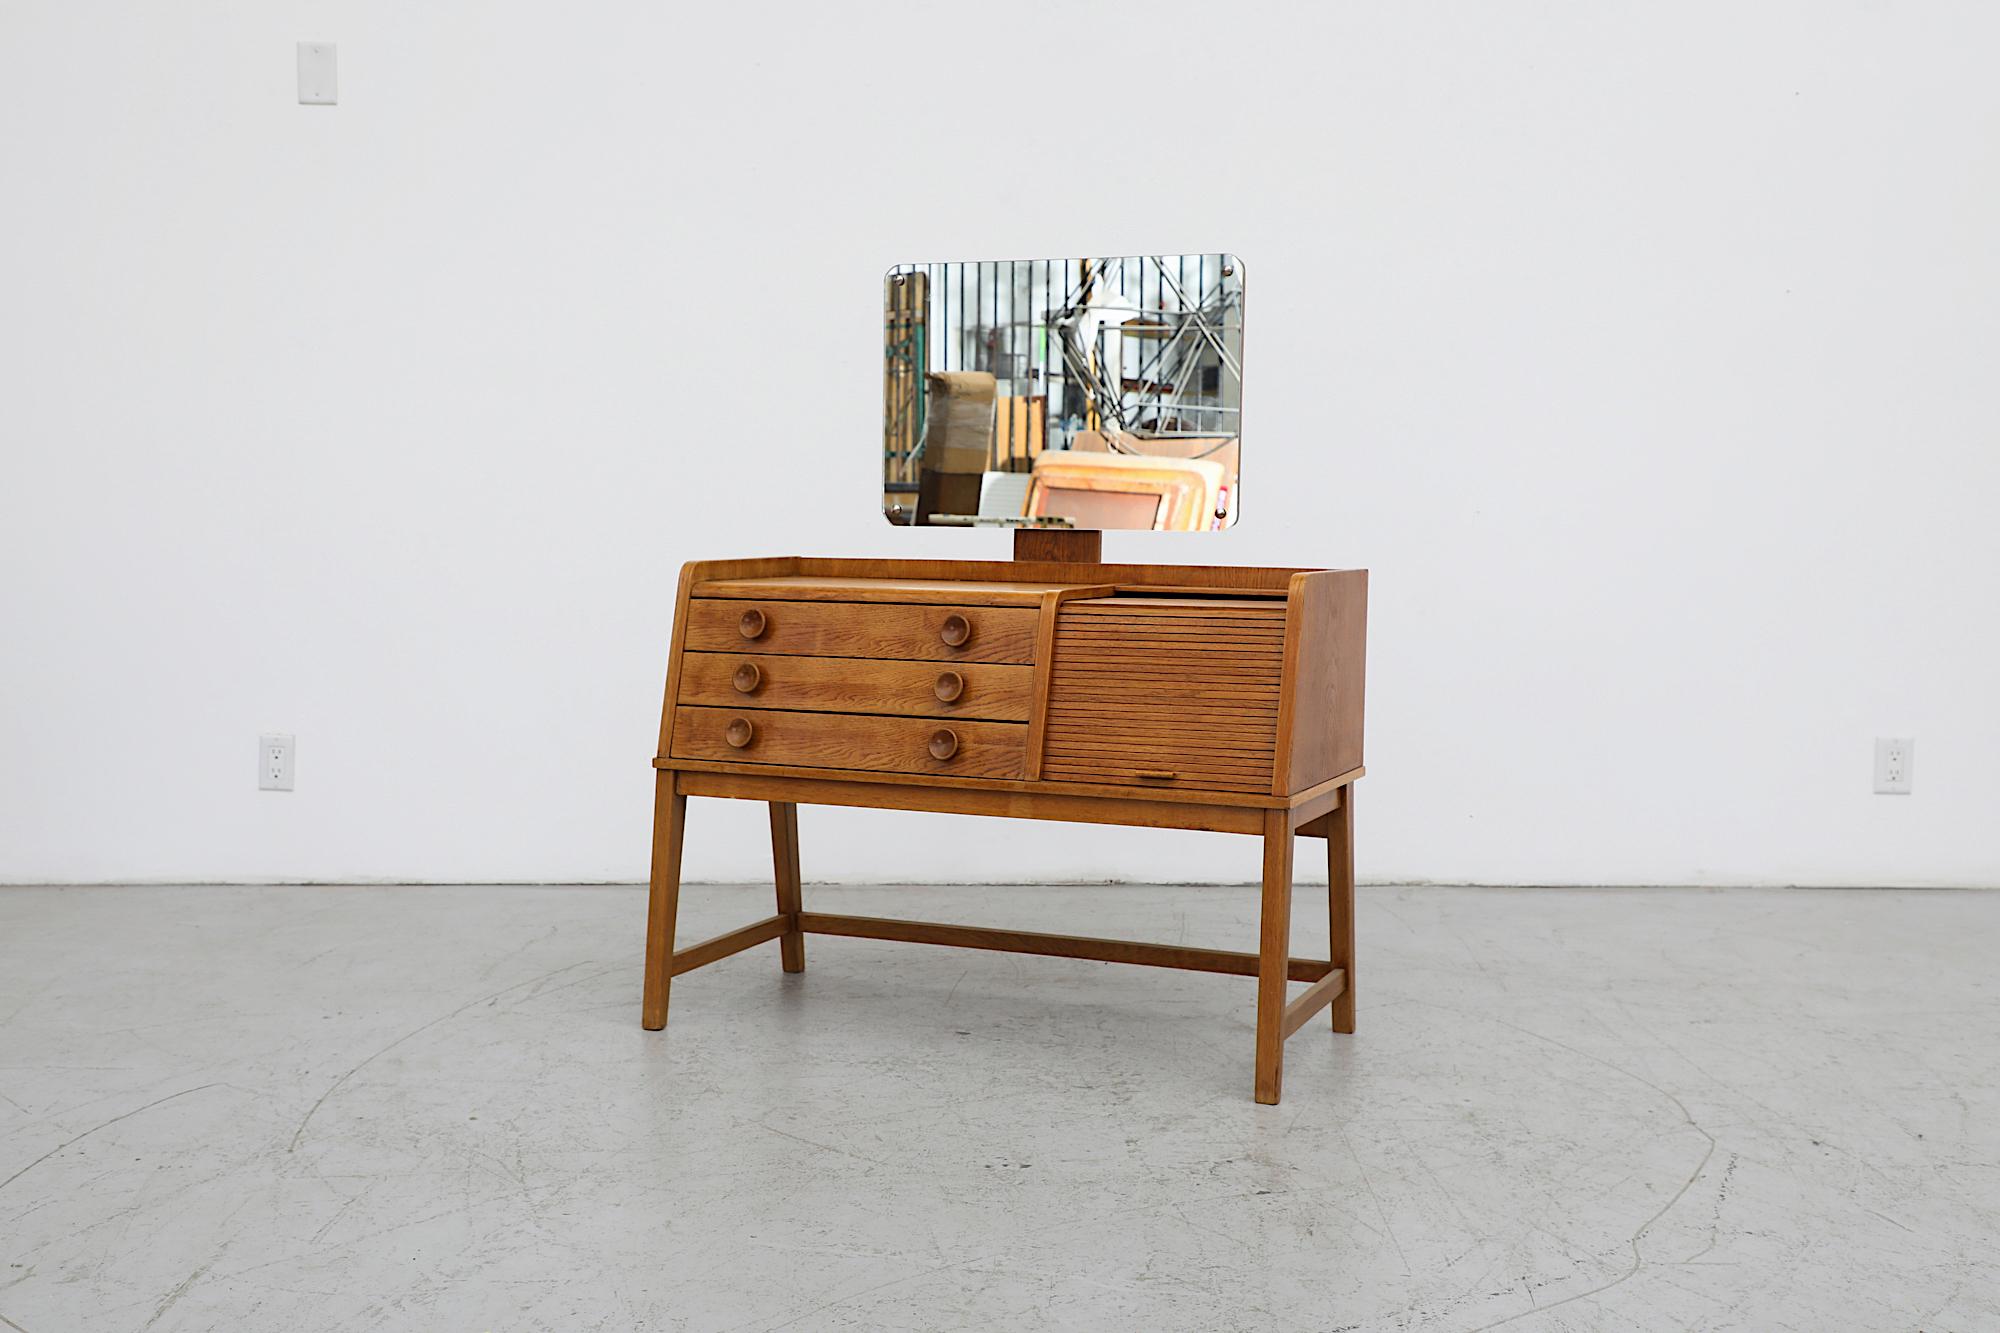 Beautiful Mid-Century oak vanity with tambour door, three drawers and rounded edge mirror. In original condition with visible wear and patina that is consistent with its age and use.